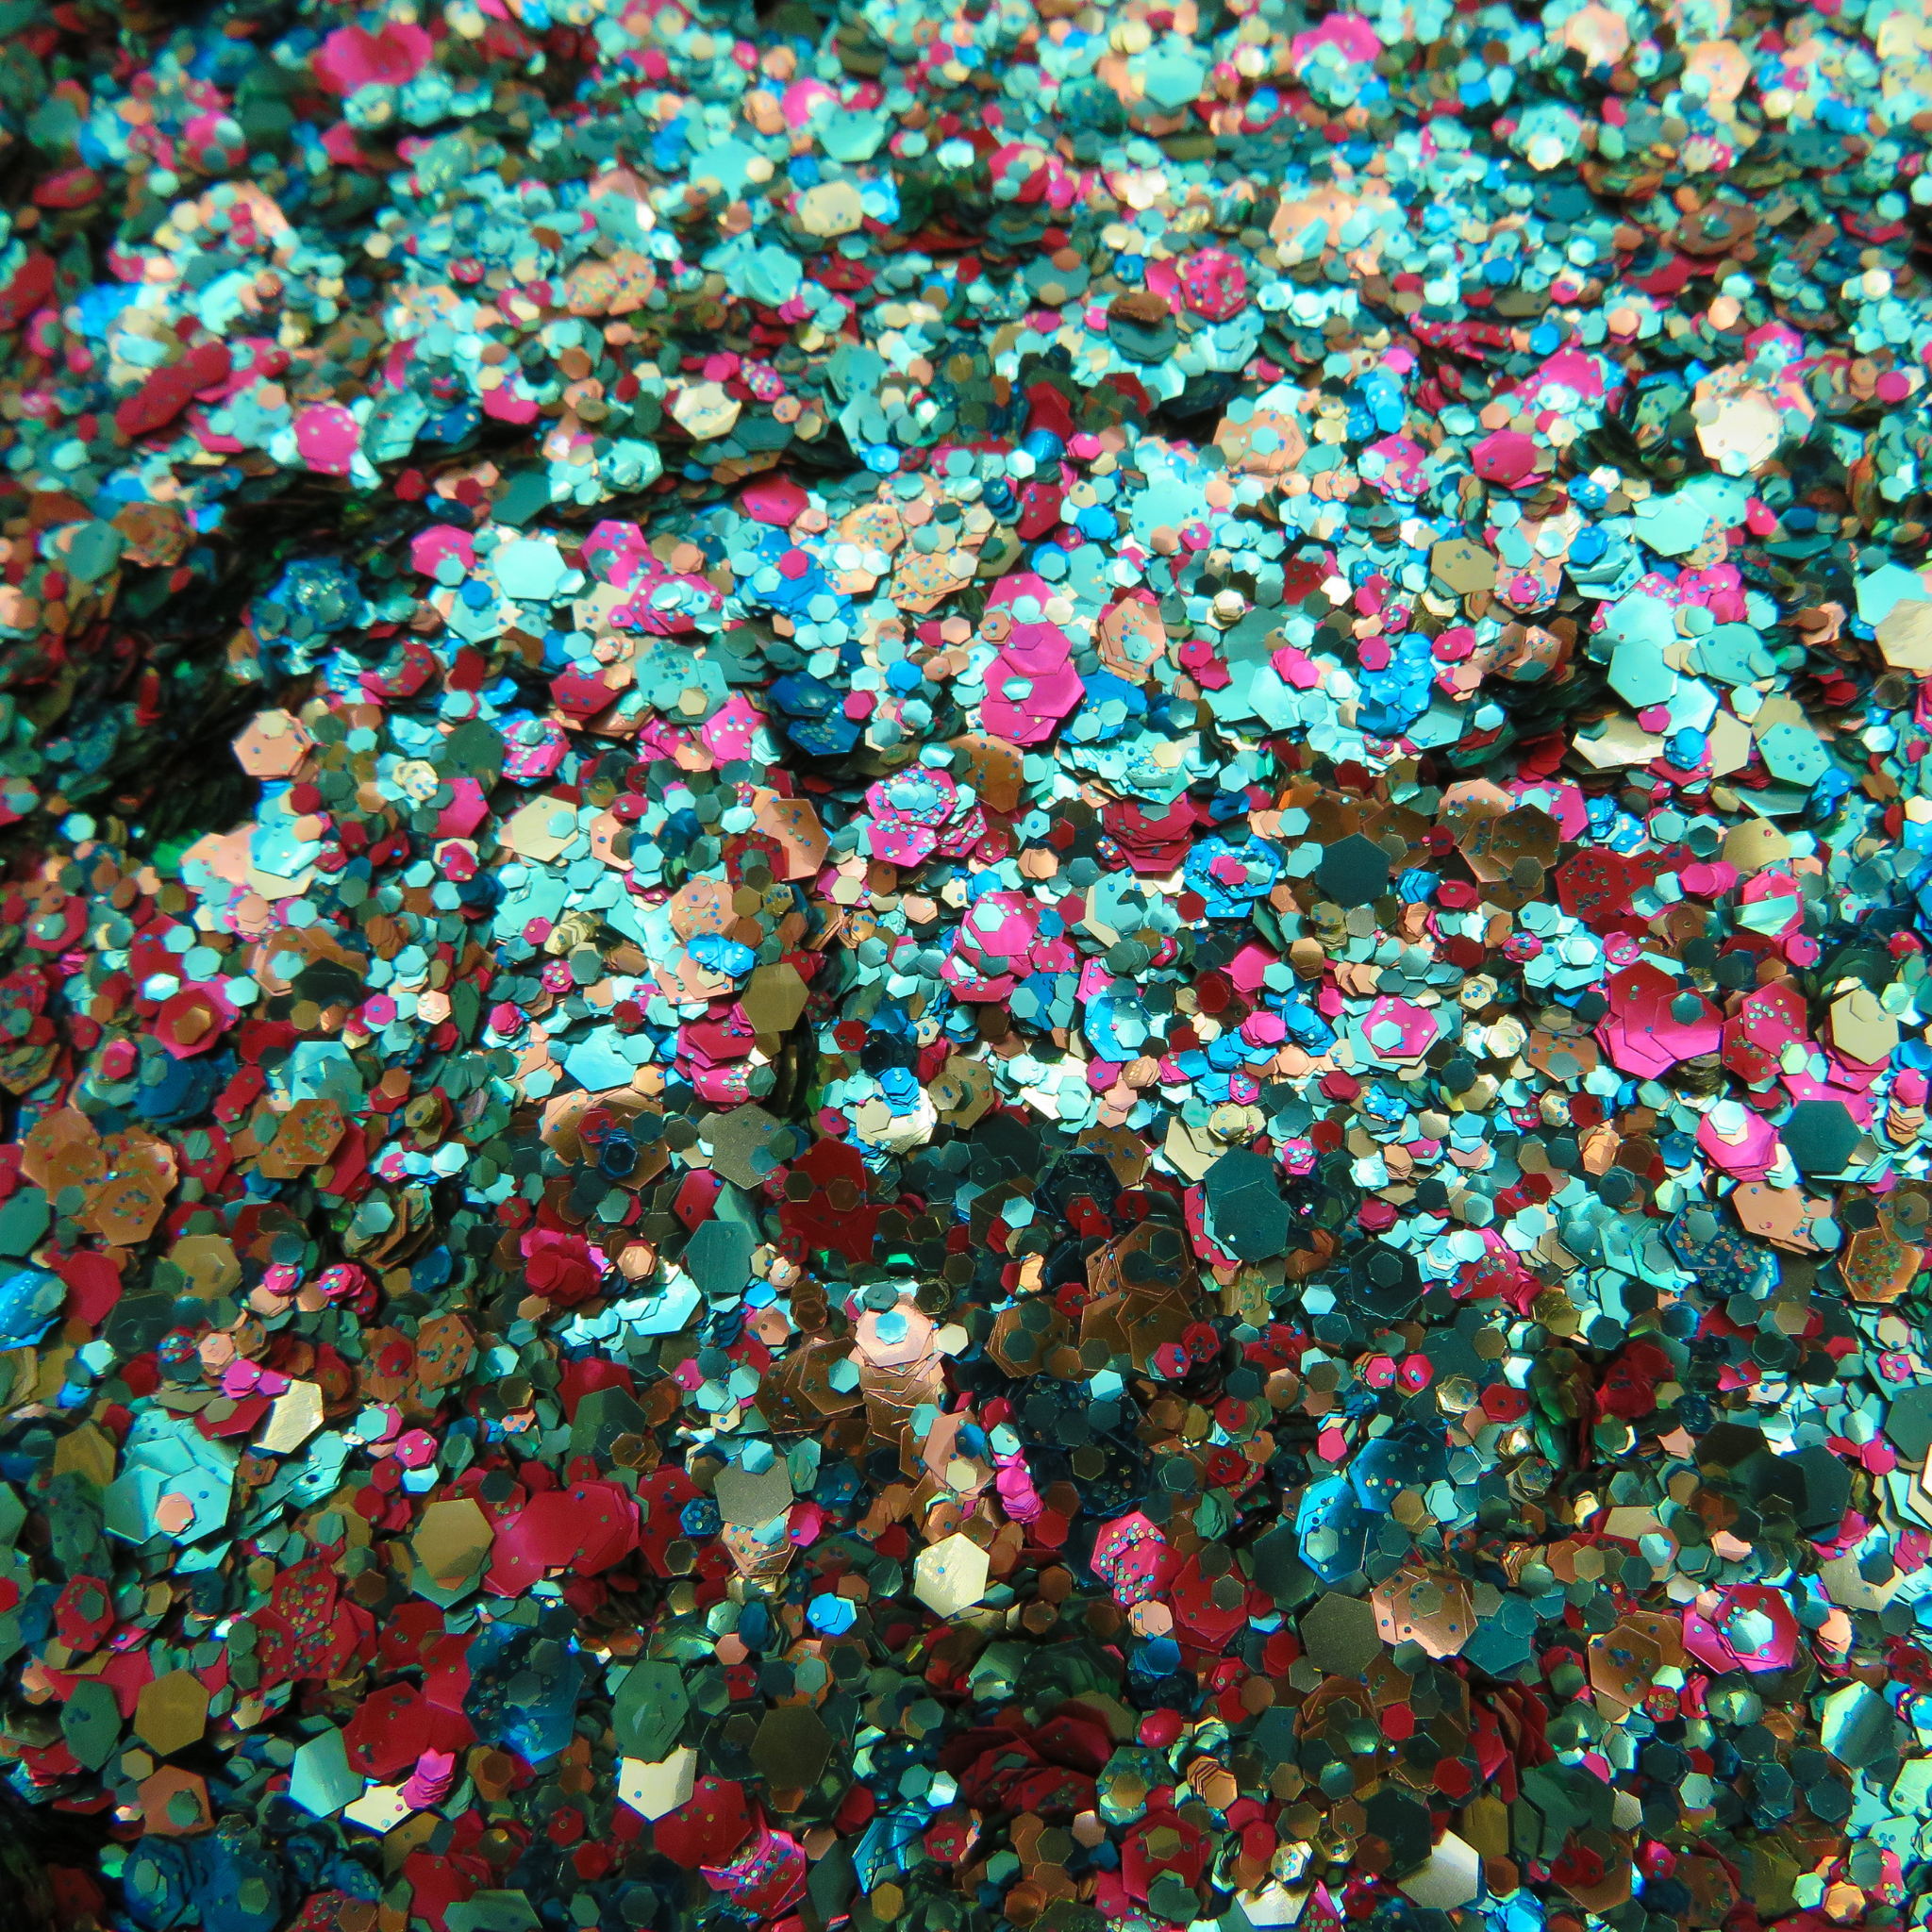 Chameleon mix of green, orange, blue, red and gold biodegradable cosmetic glitter